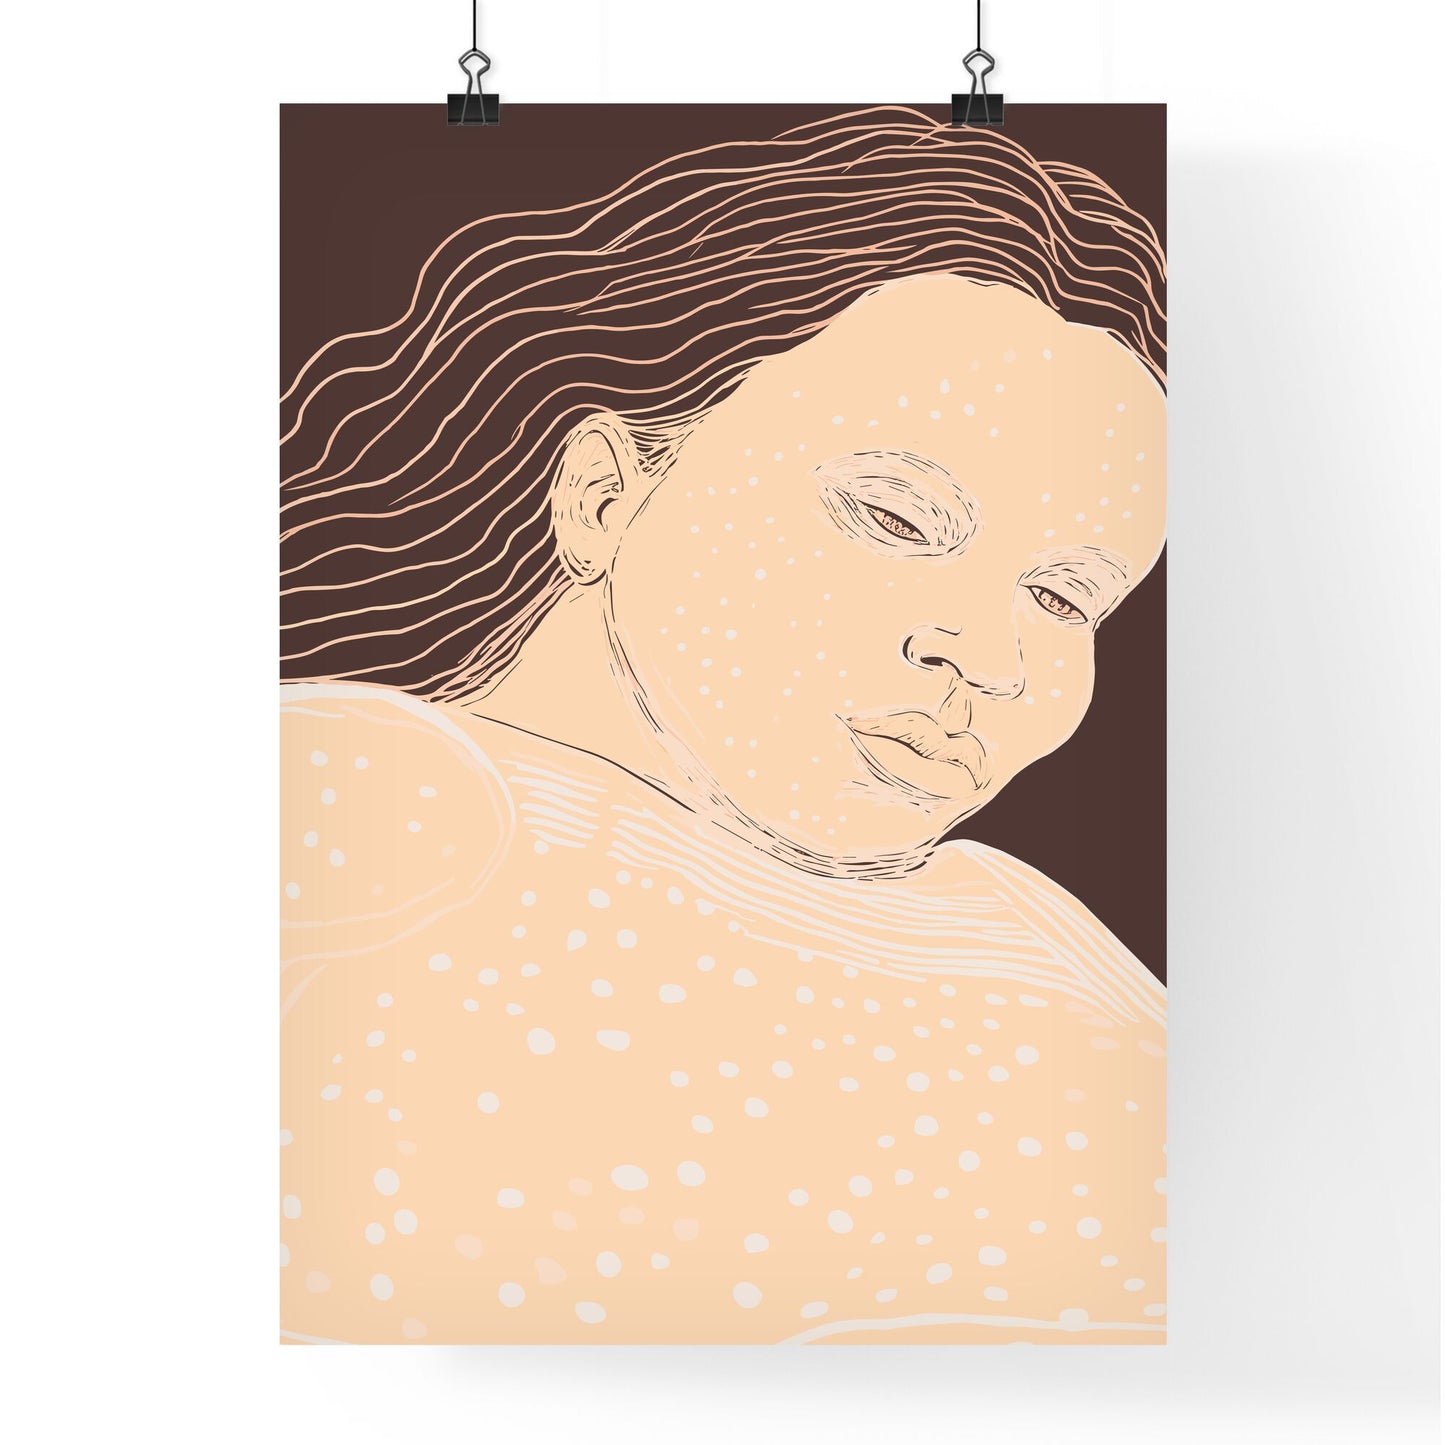 Pregnant Woman - A Drawing Of A Woman With Long Hair Default Title